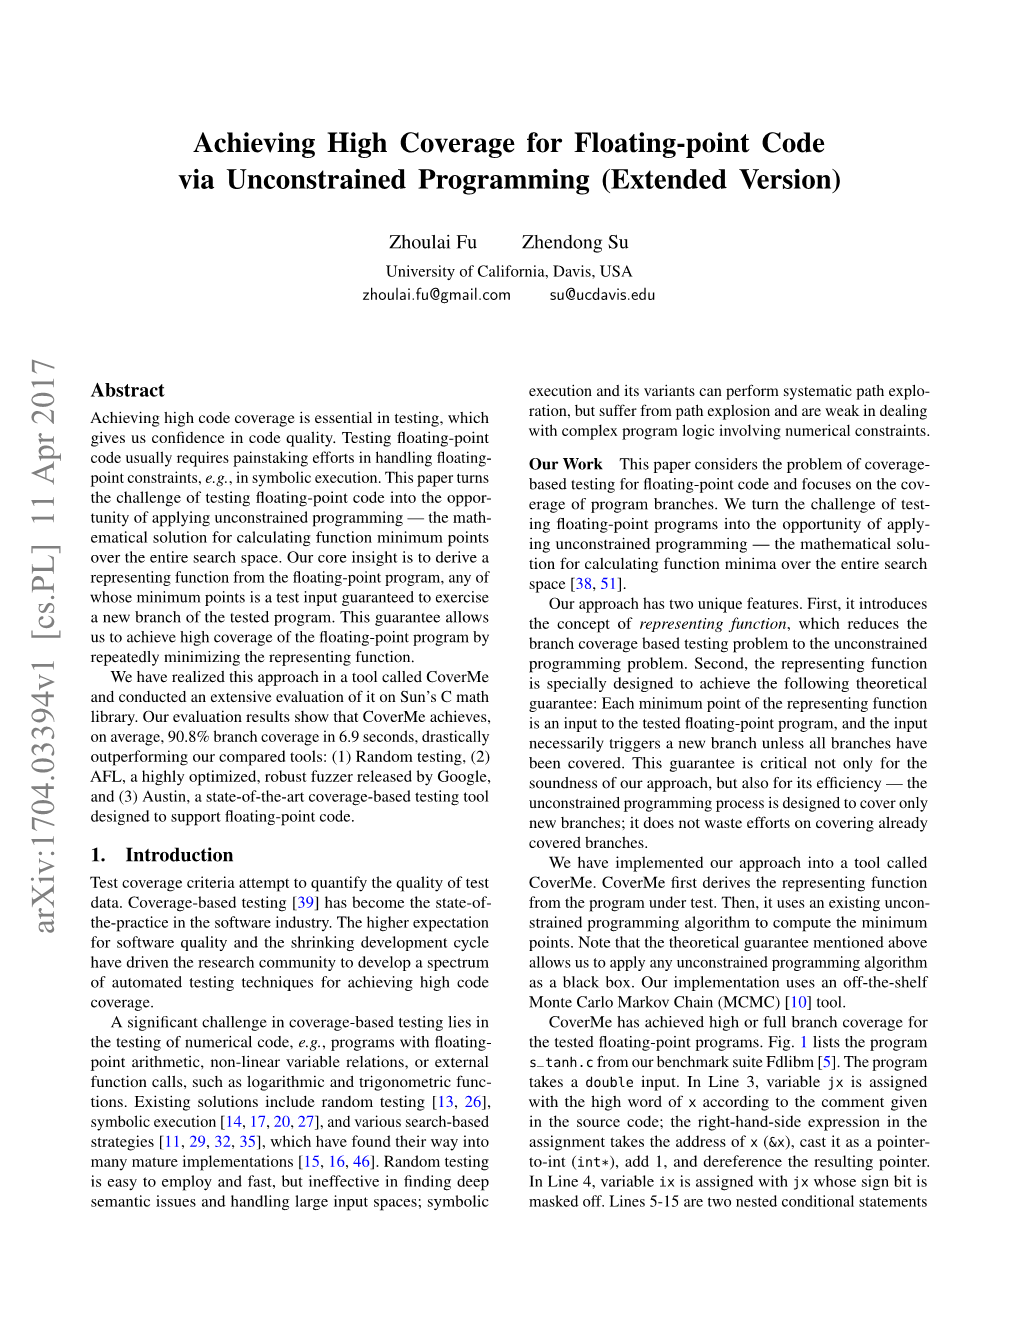 Achieving High Coverage for Floating-Point Code Via Unconstrained Programming (Extended Version)